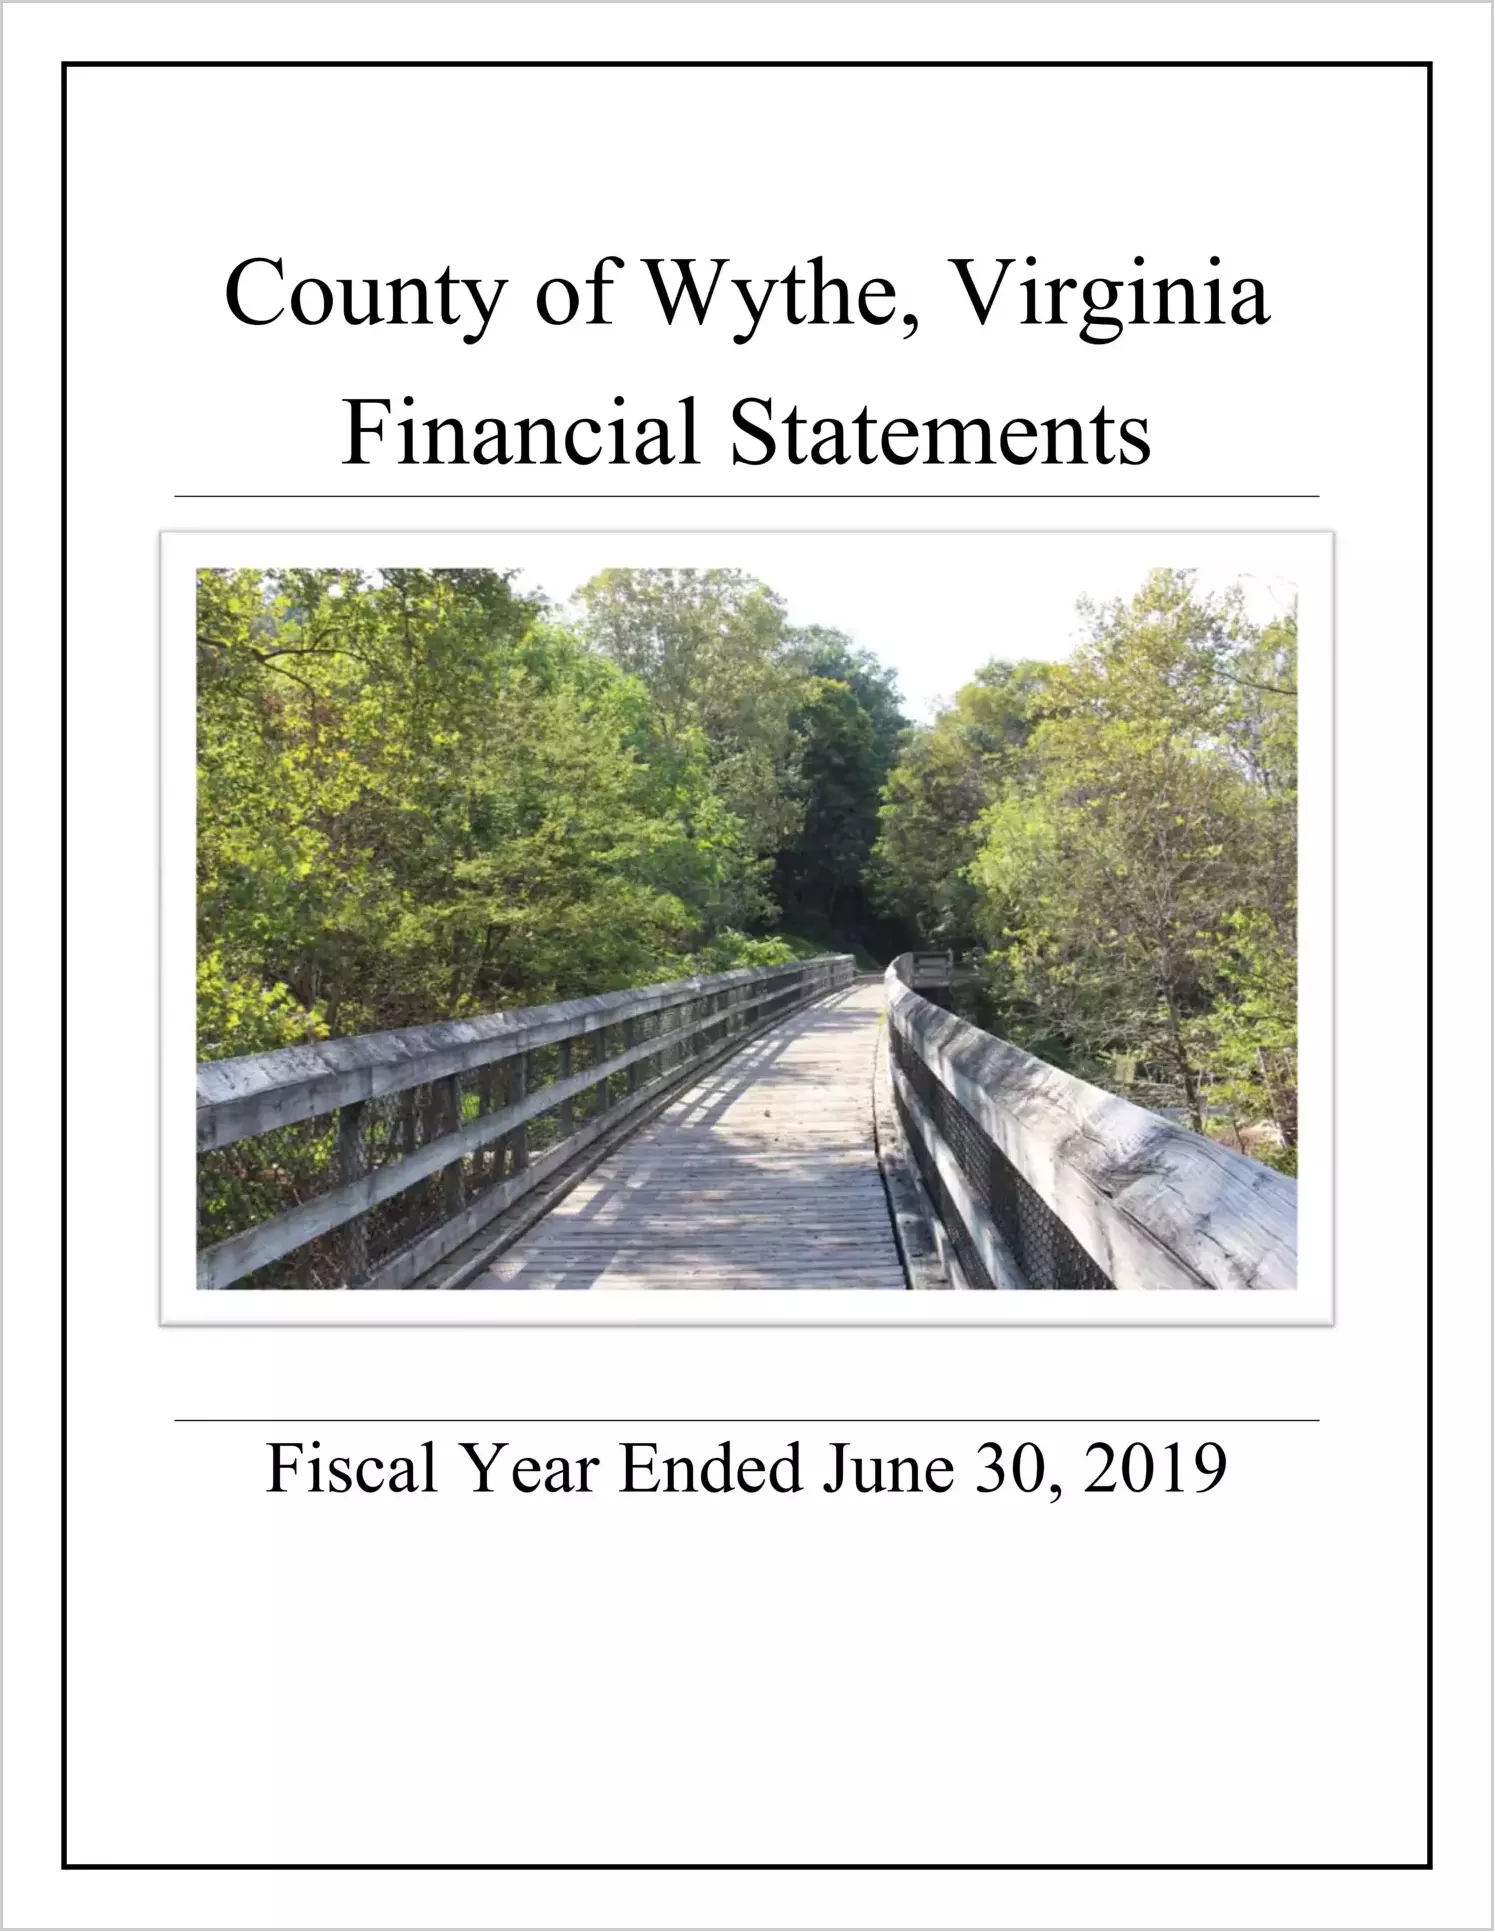 2019 Annual Financial Report for County of Wythe